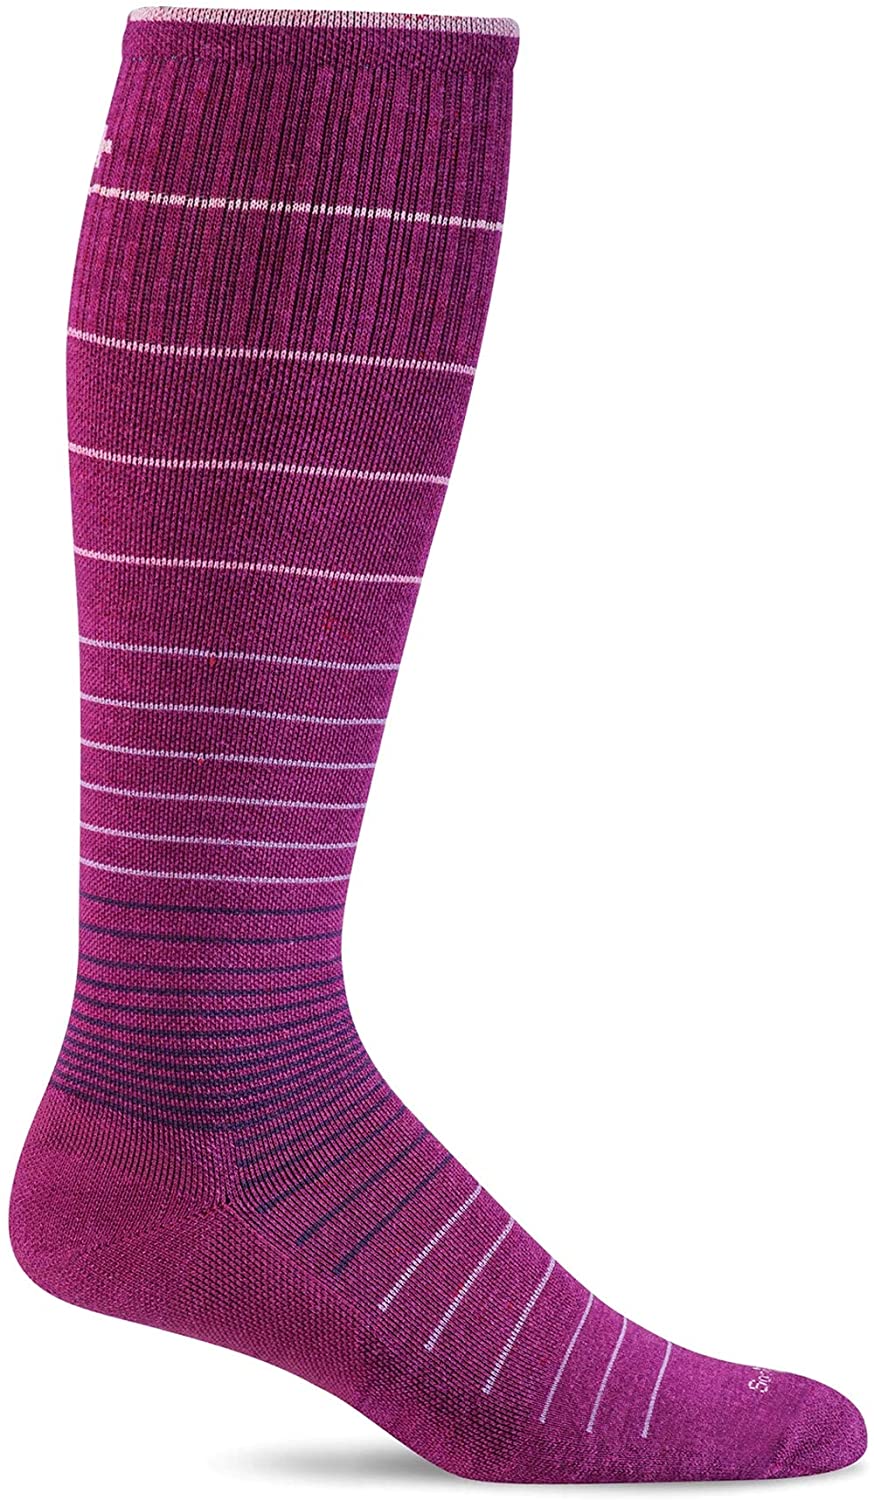 Sockwell Women's Circulator Moderate Graduated Compression Sock in Violet from the side